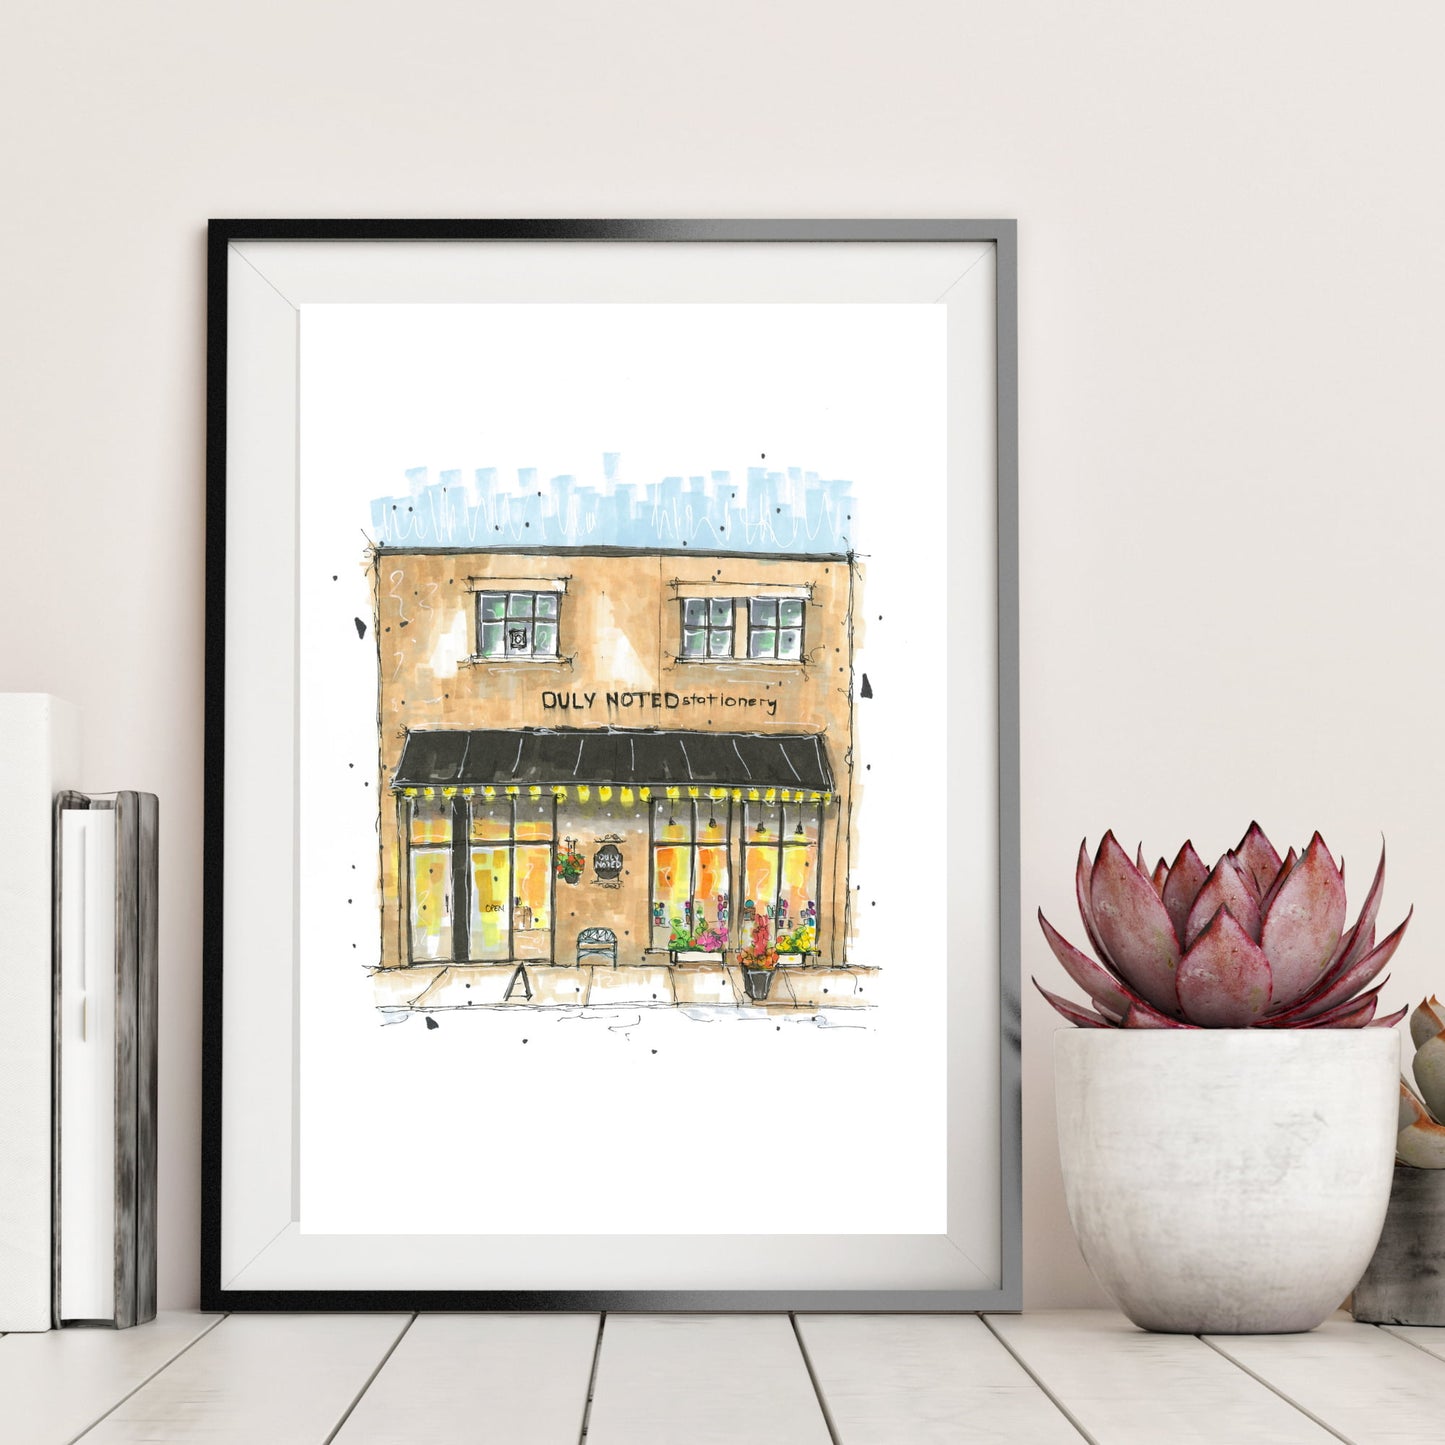 DTS0039 - Duly Noted Stationary, Halifax, Storefront Print, White and Brown, Architectural Sketch, Corner Shop, Art print, Downtown Sketcher, Wynand van Niekerk 